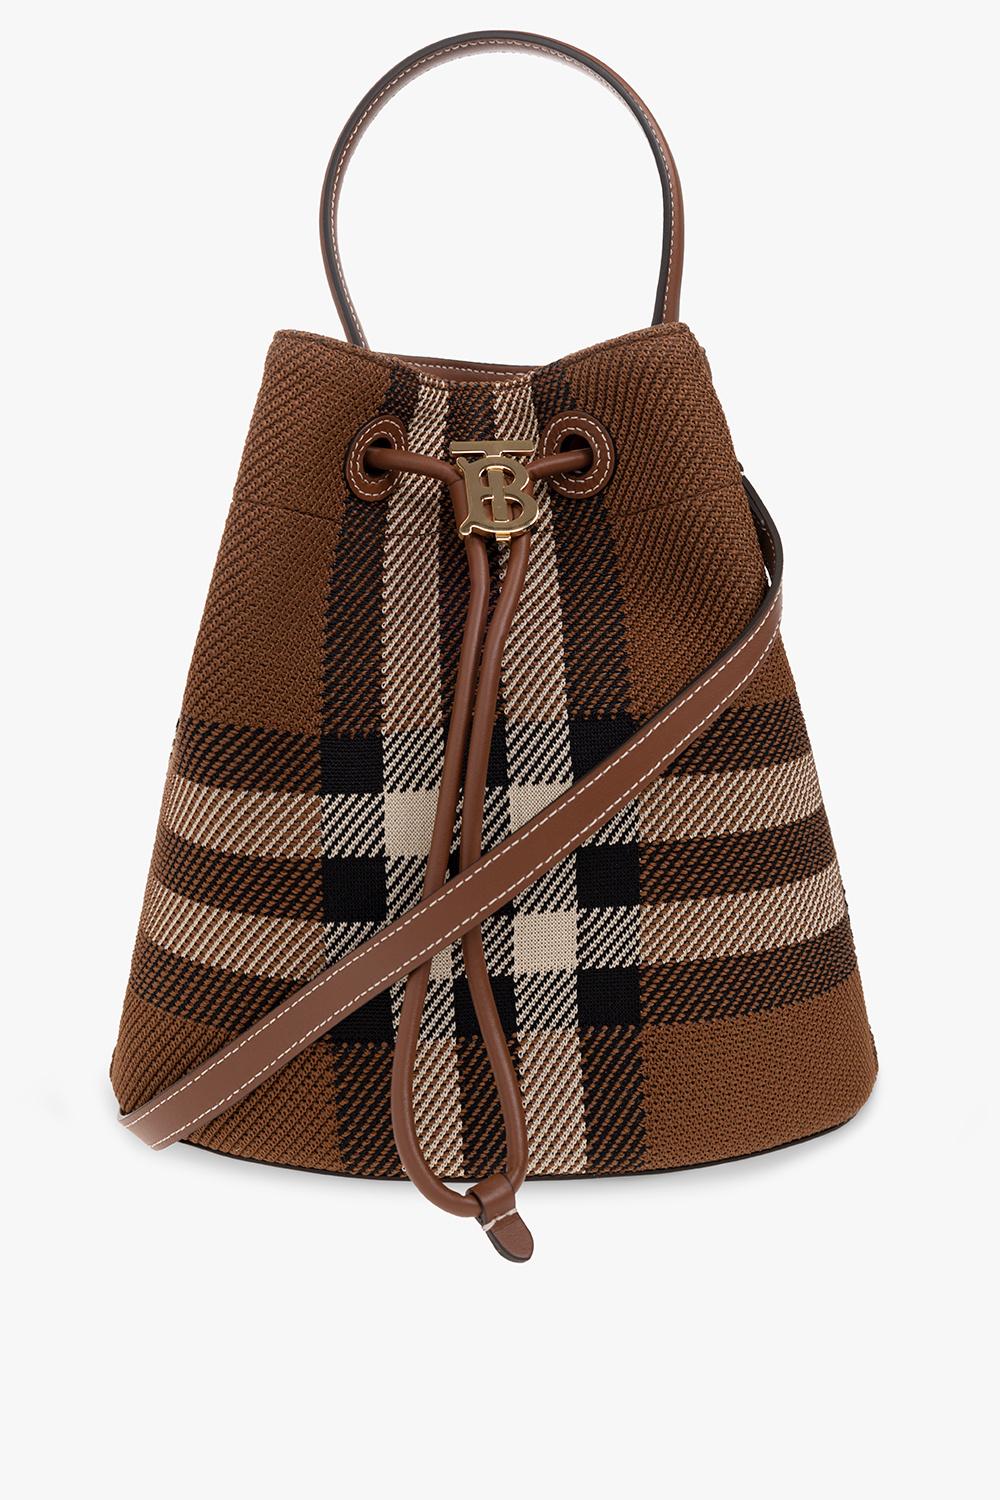 Burberry 'tb Small' Bucket Bag in Brown